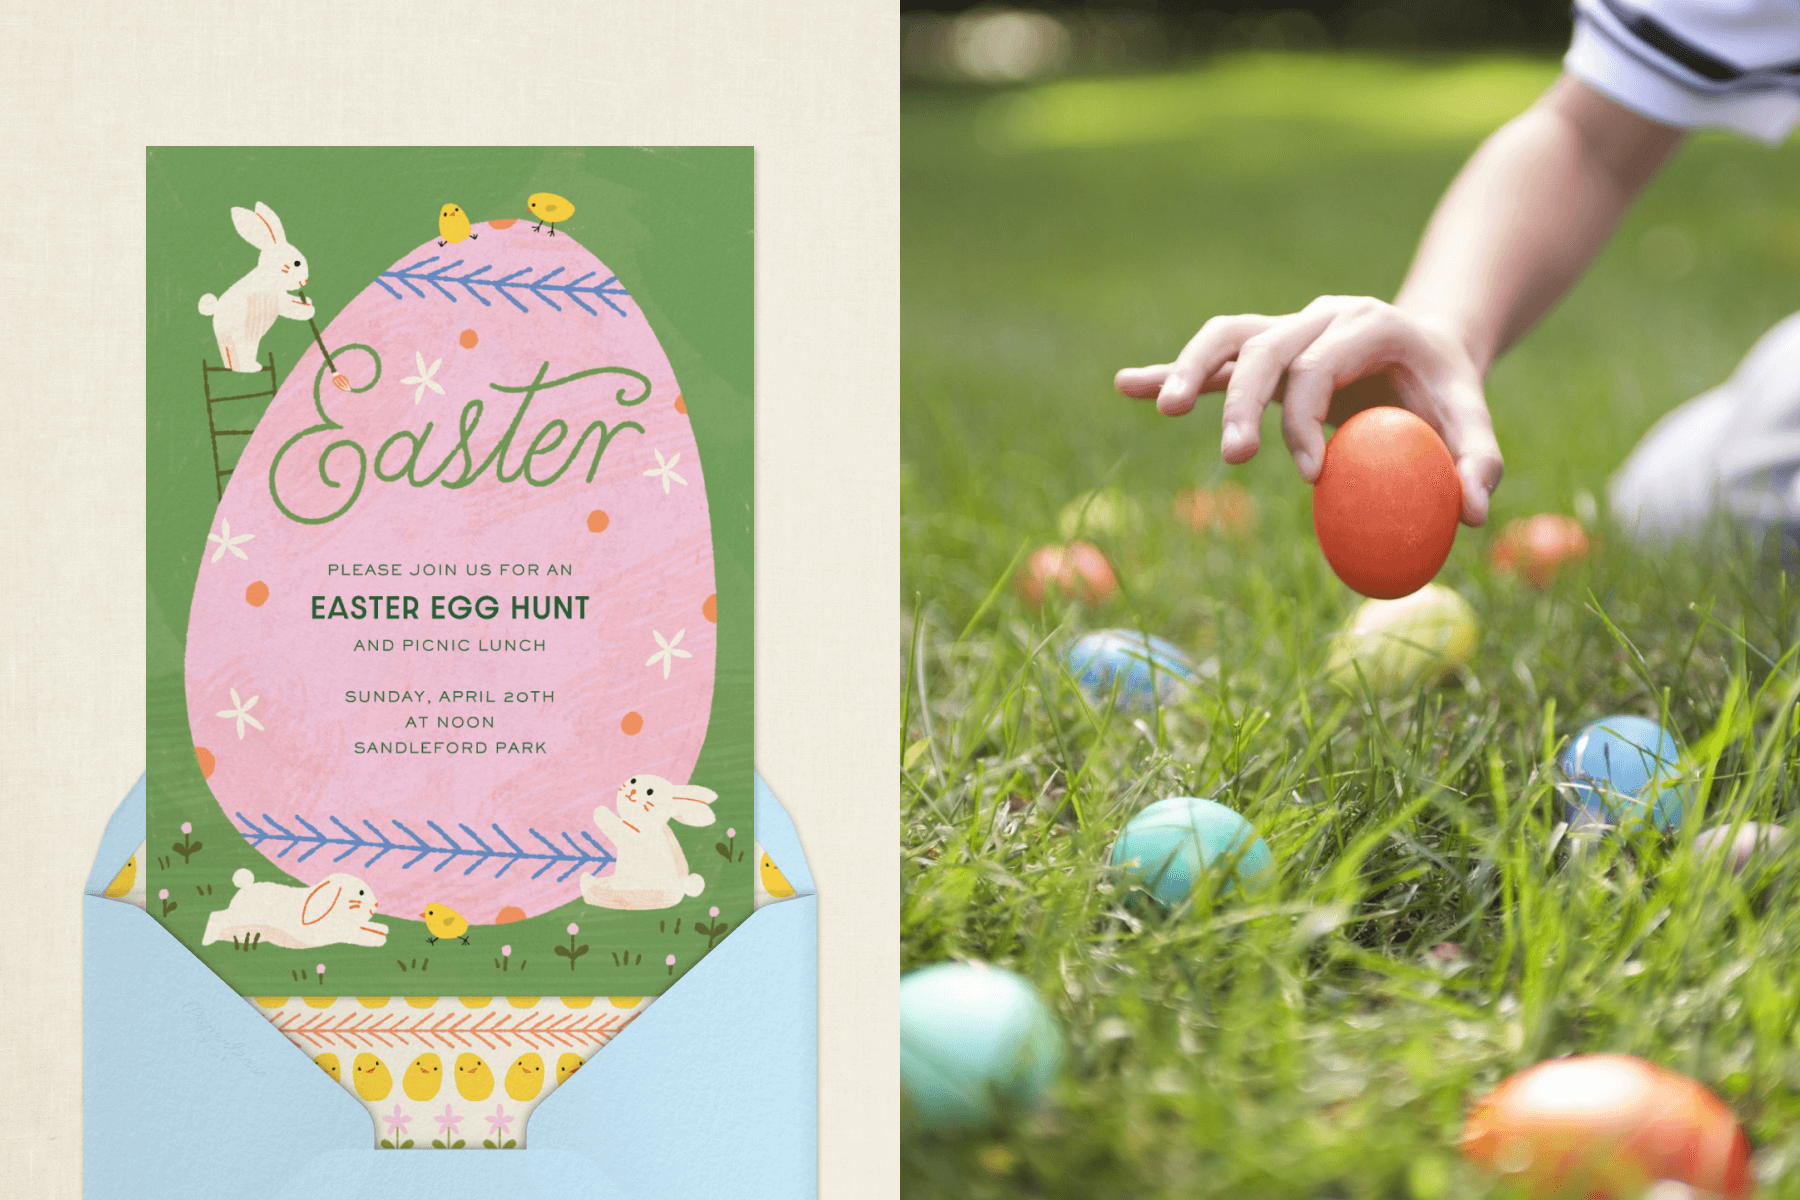 Left: An Easter invitation with an illustration of bunnies painting a giant Easter egg; Right: A child’s hand lifts a colored egg out of the grass.